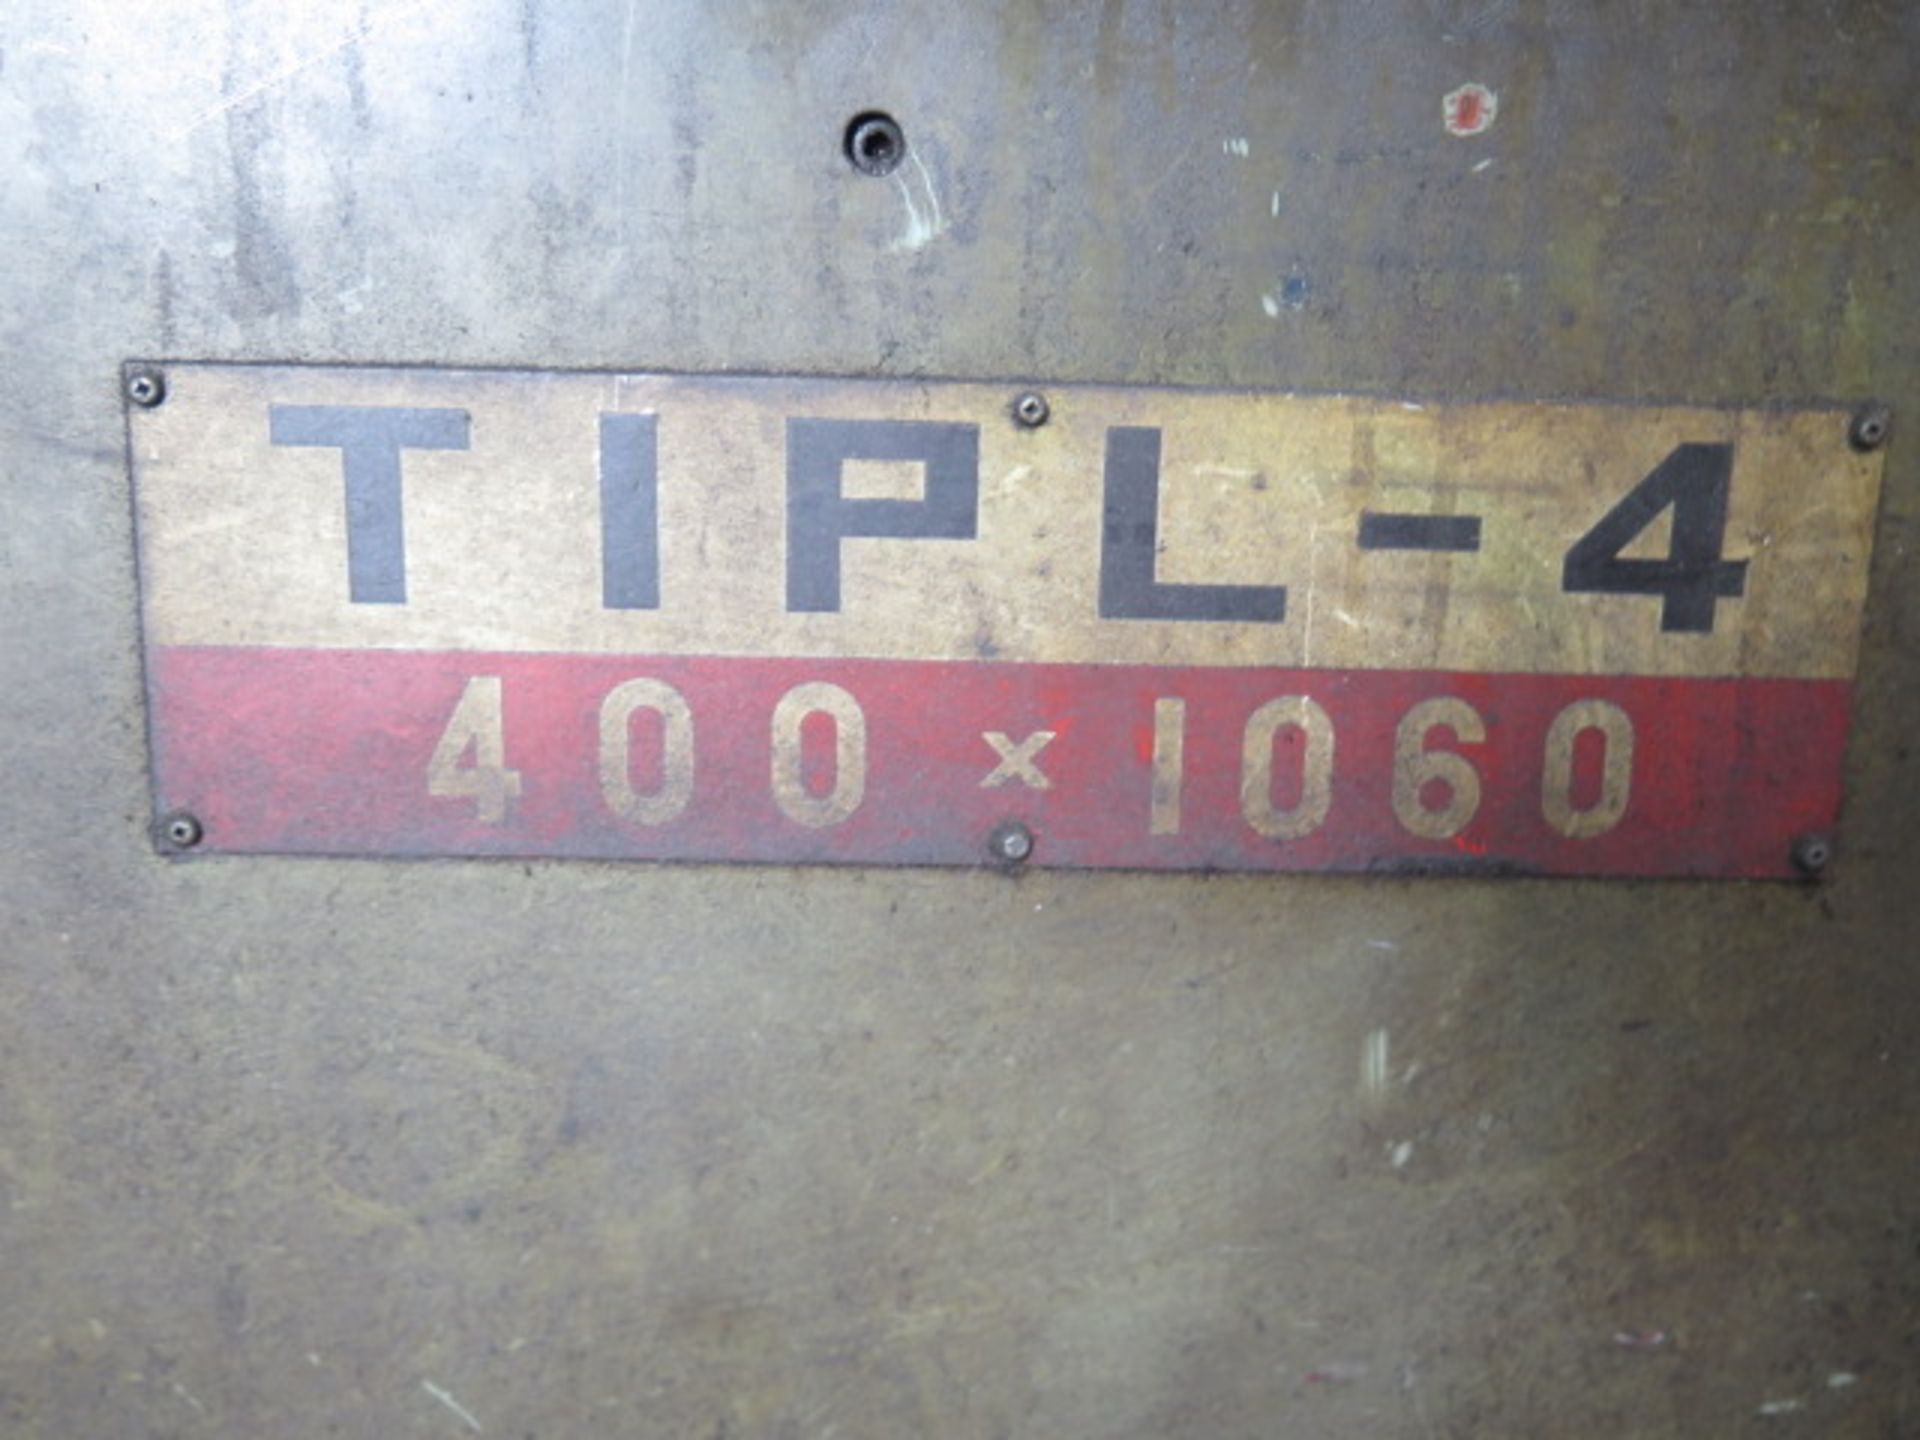 Tongil TIPL-4 15” x 42” Geared Head Gap Bed Lathe w/ 60-1500 RPM, Inch/mm Threading, SOLD AS IS - Image 11 of 12